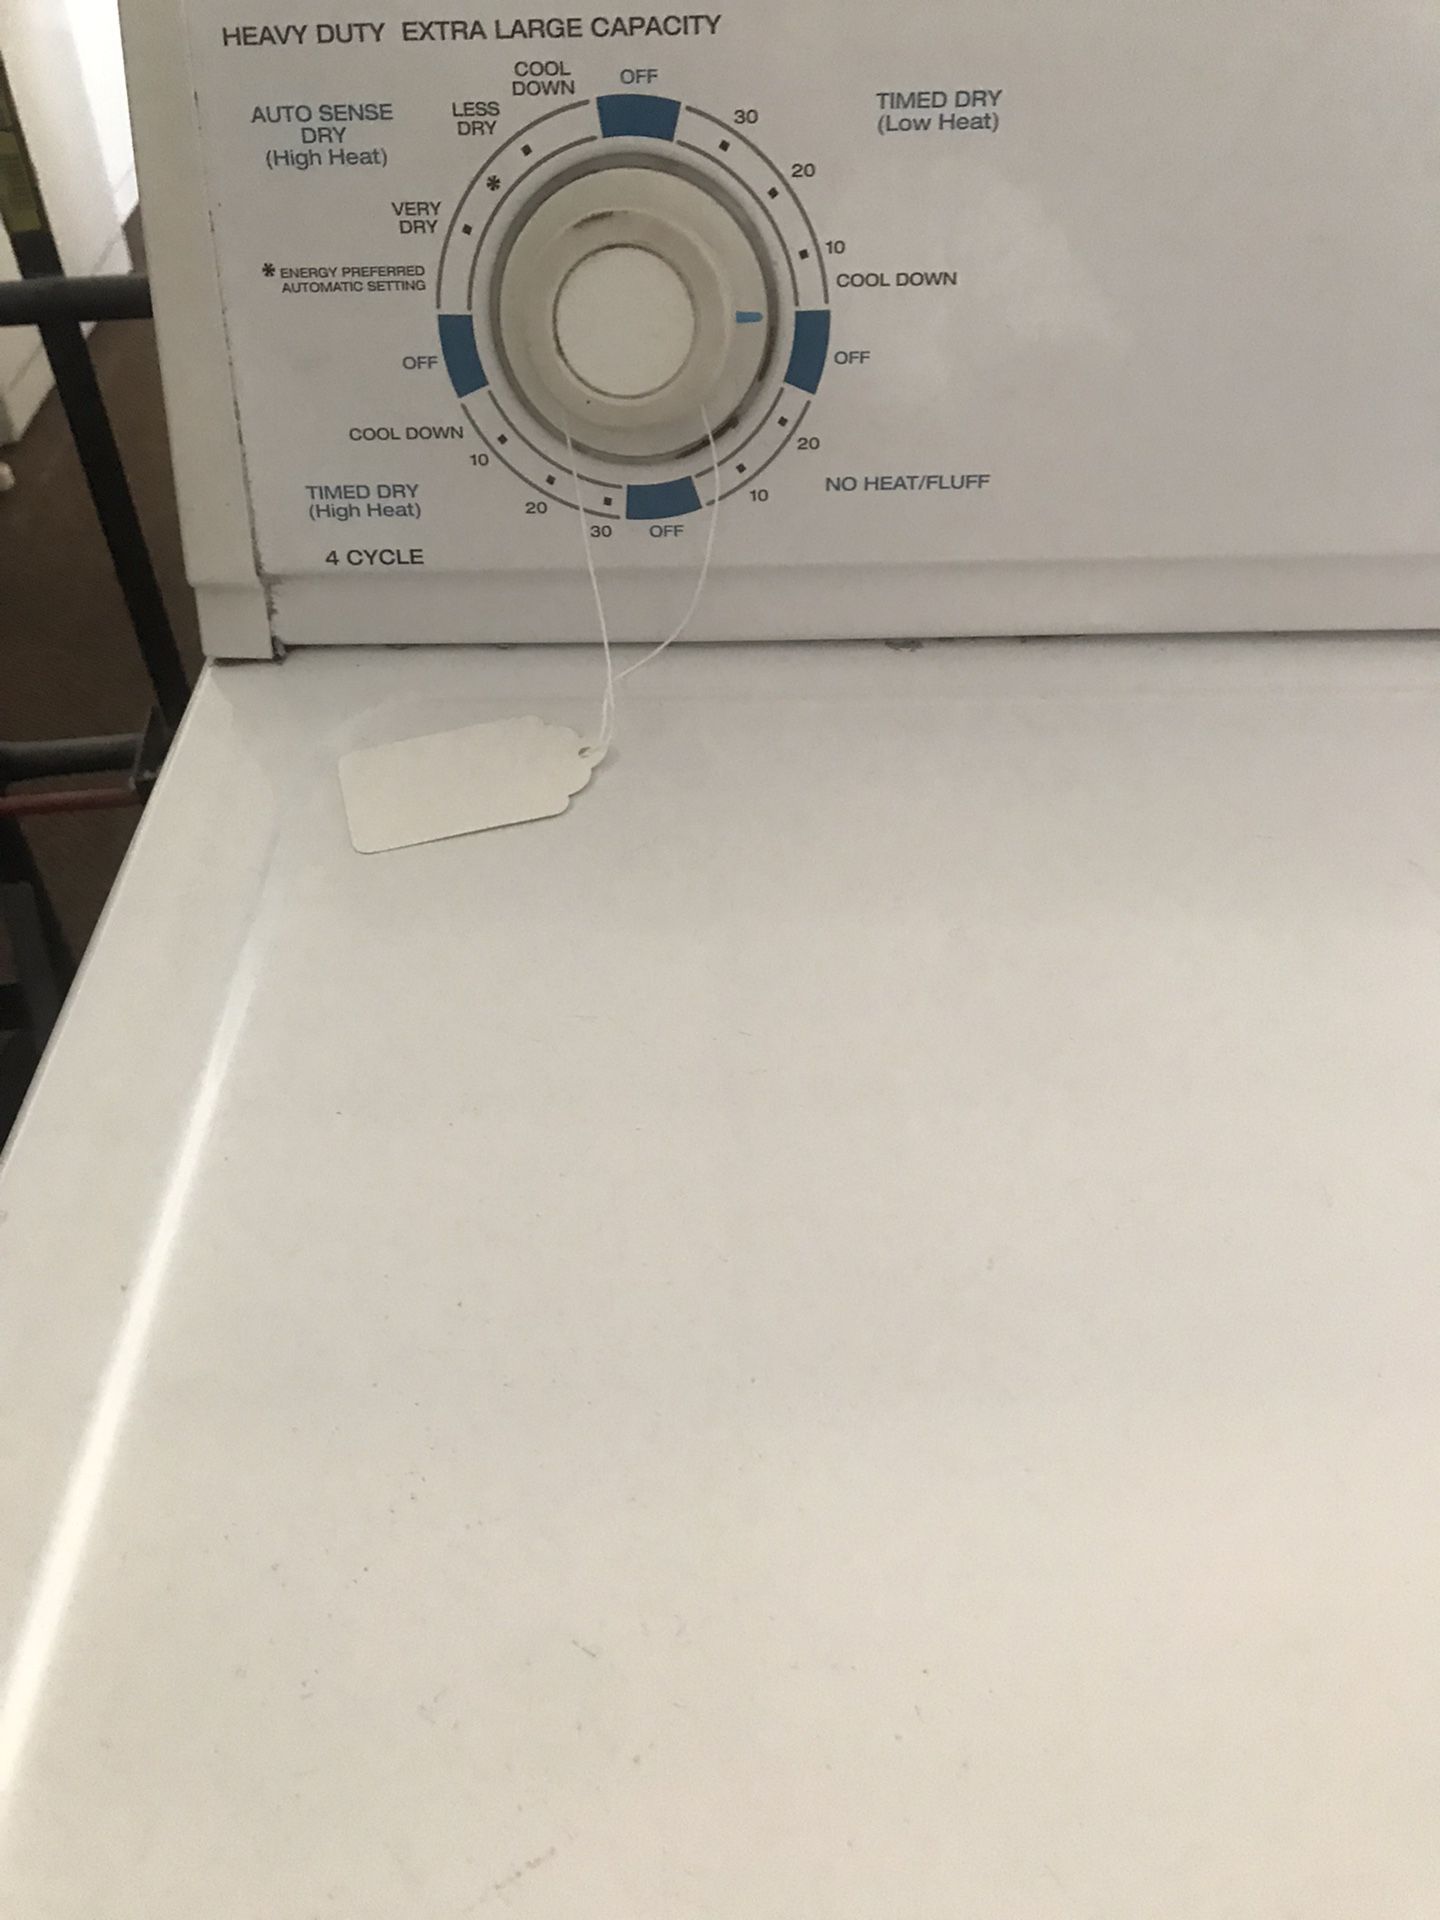 Whirlpool matching washers and dryer’s